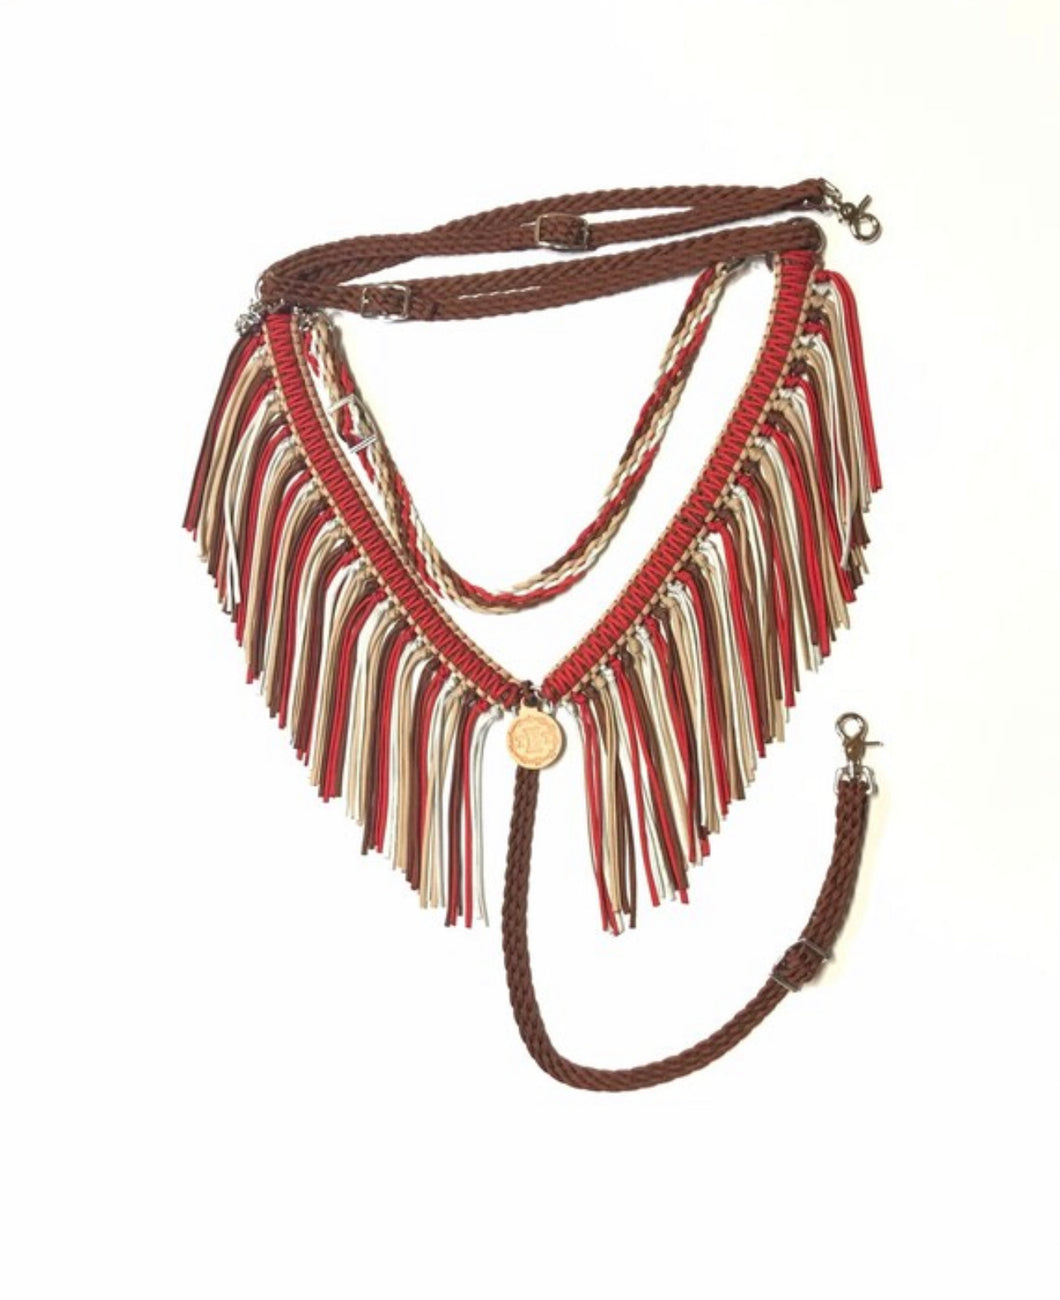 fringe breast collar red tan and brown with a wither strap